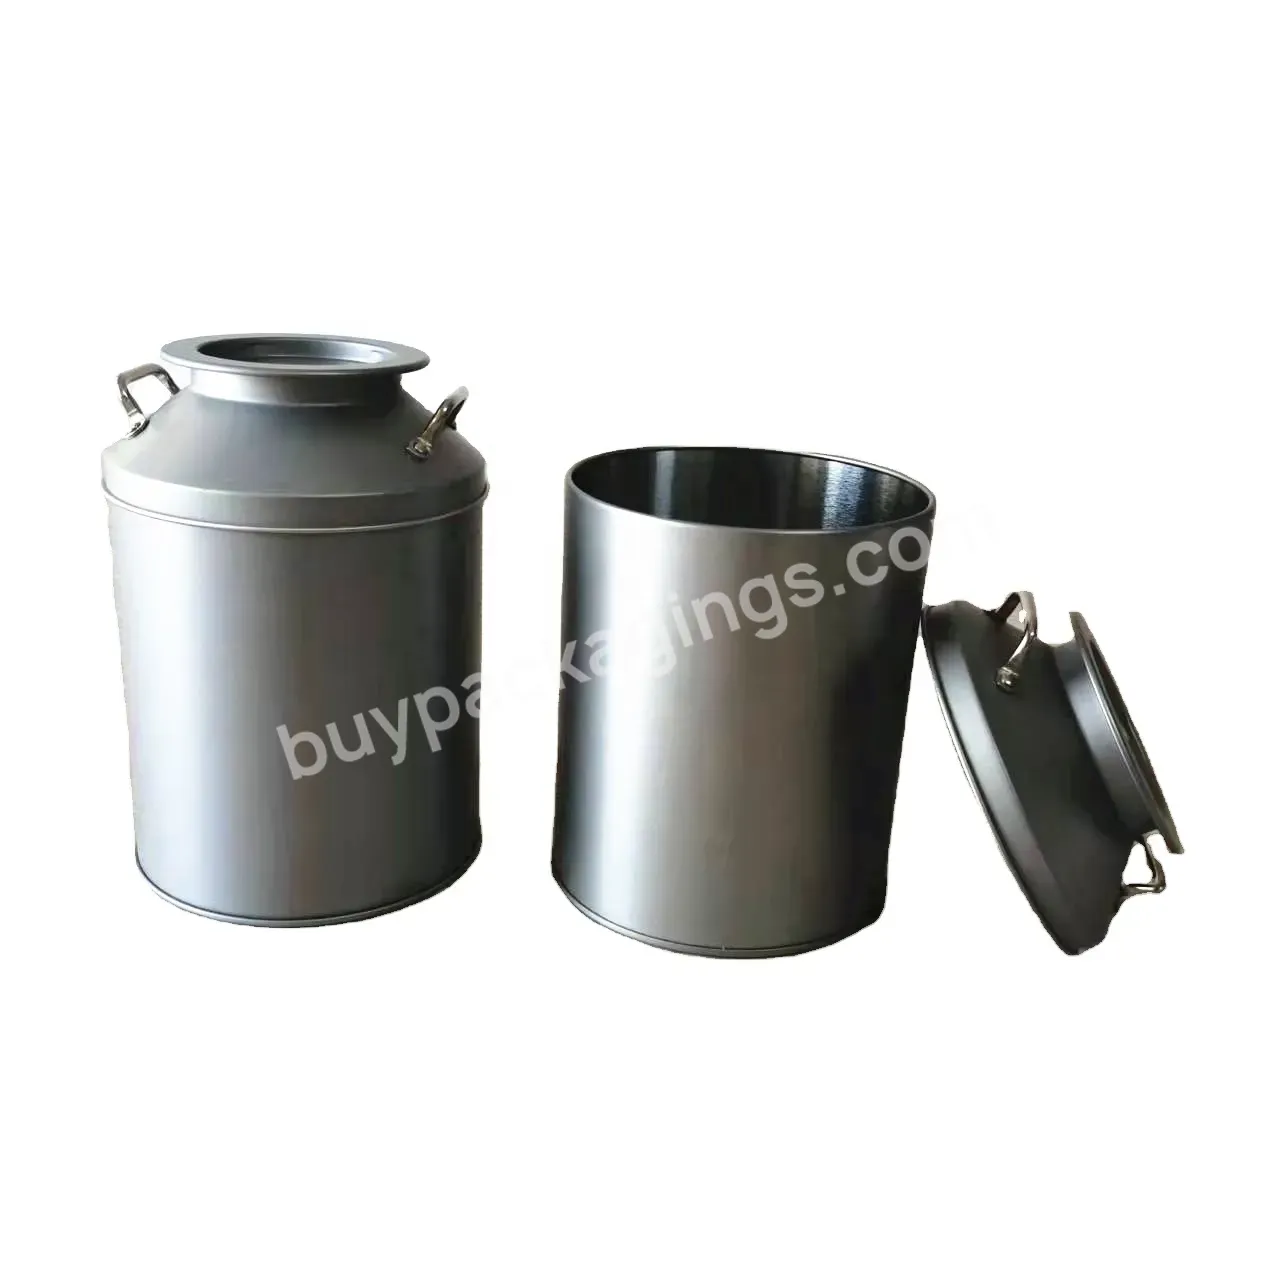 Custom Design Decorative Big Milk Churn Tin Can For Packaging Chocolate Barks Cookies Candies 110dx160hmm - Buy Metal Milk Churn Container Washing Powder Metal Container,Decorative Milk Can Tinplate Churn Can With Handle,Large Milk Chocolate Packagin